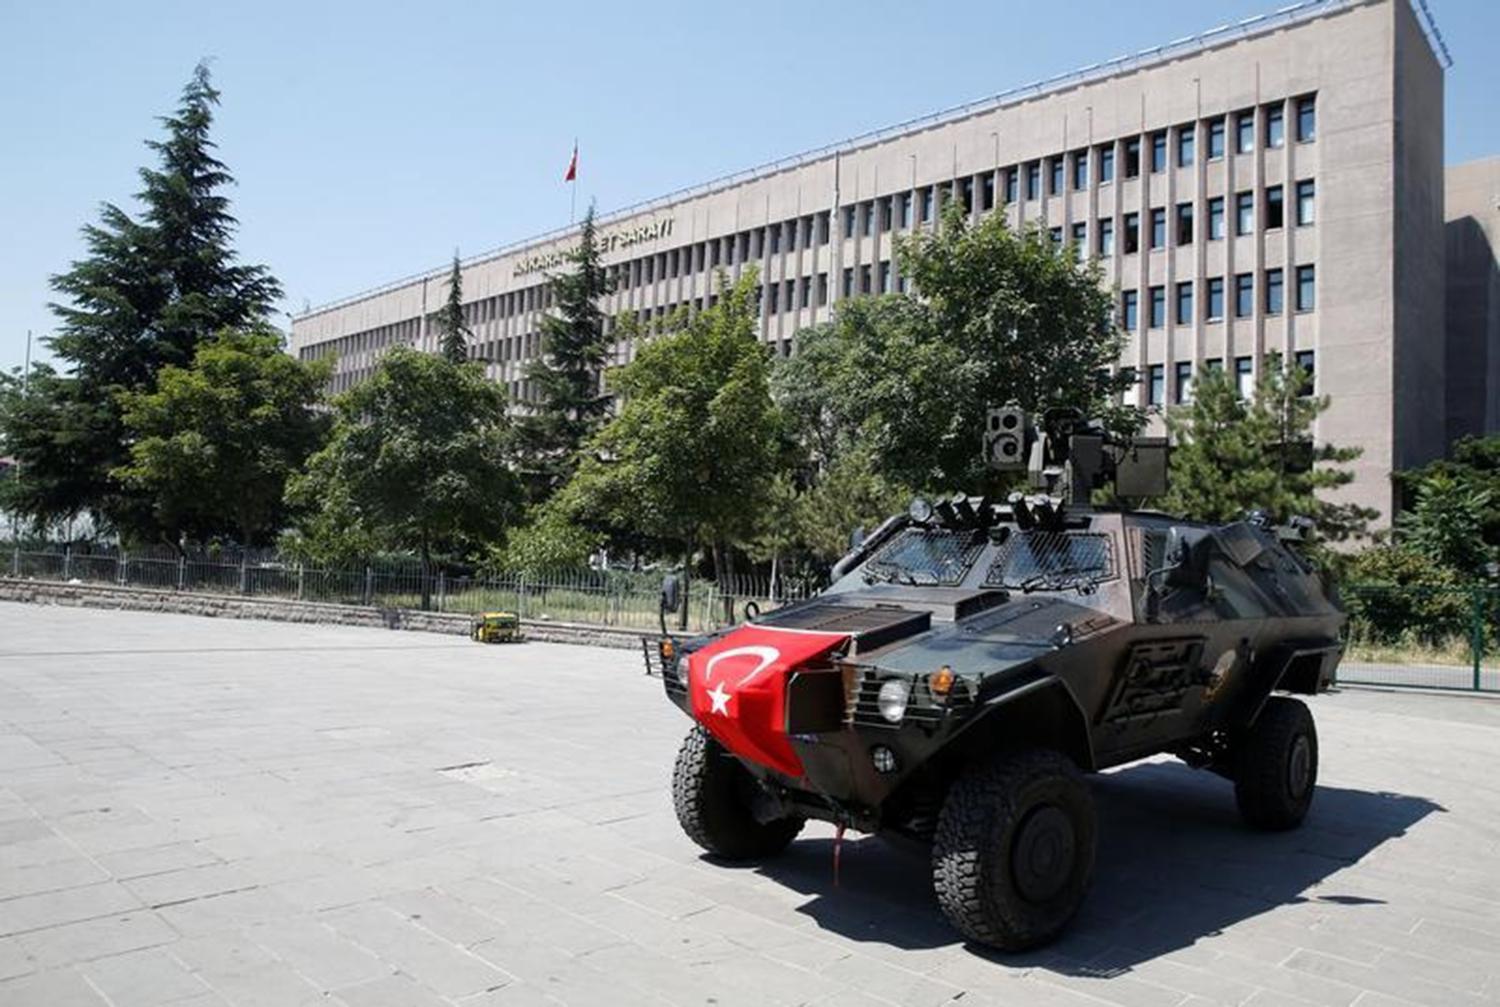 Members of police special forces keep watch from an armored vehicle in front of the Justice Palace in Ankara, Turkey, July 18, 2016. © 2016 Baz Ratner/Reuters